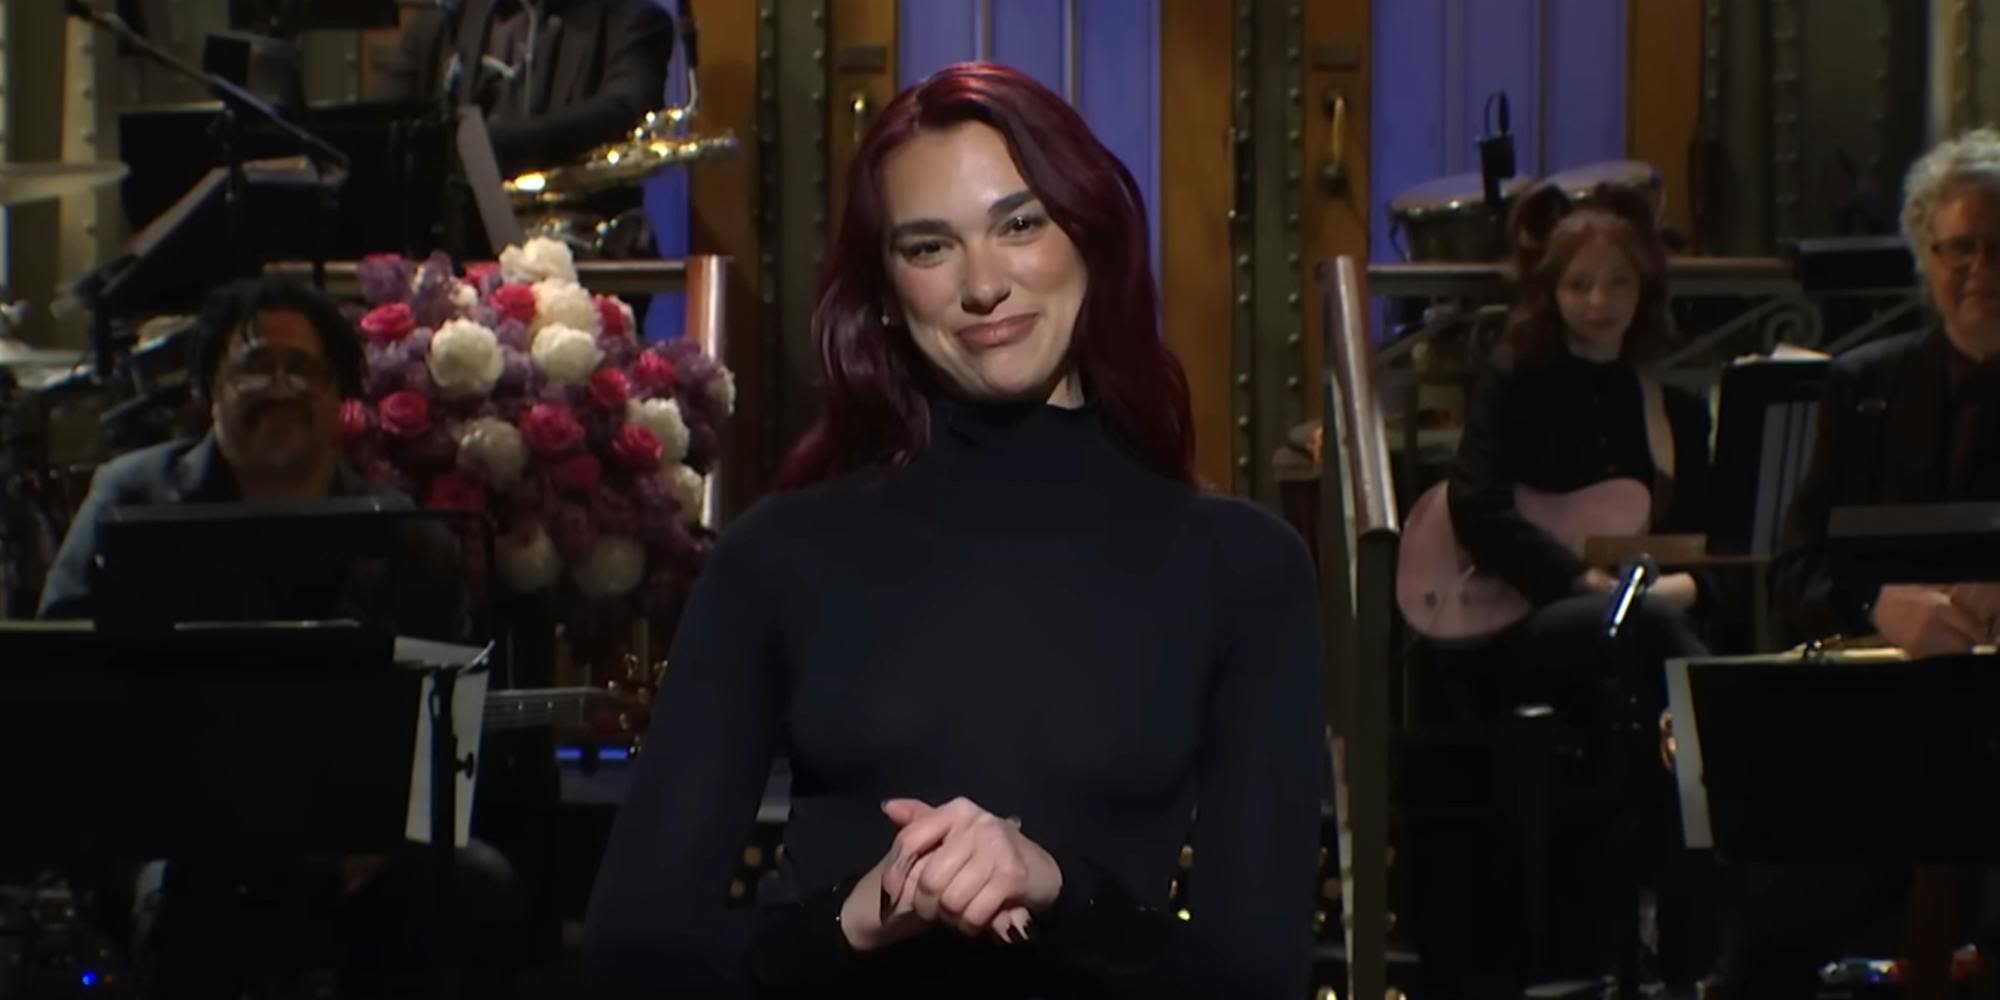 'I gave you the greatest meme of all time': Dua Lipa embraces her meme status as host of 'SNL'